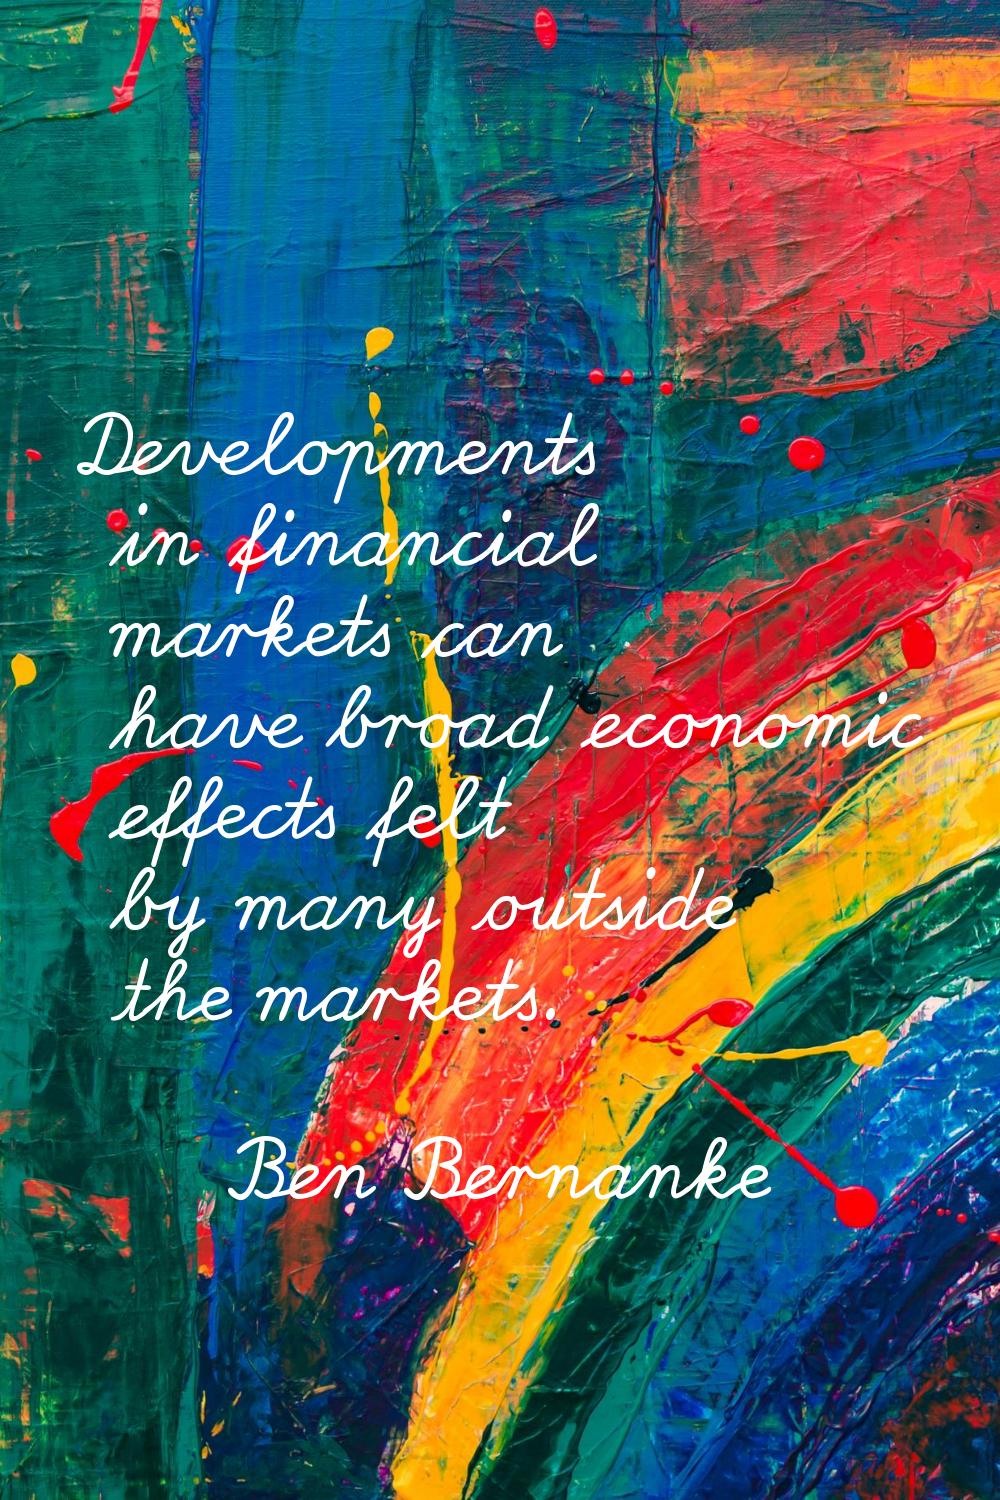 Developments in financial markets can have broad economic effects felt by many outside the markets.